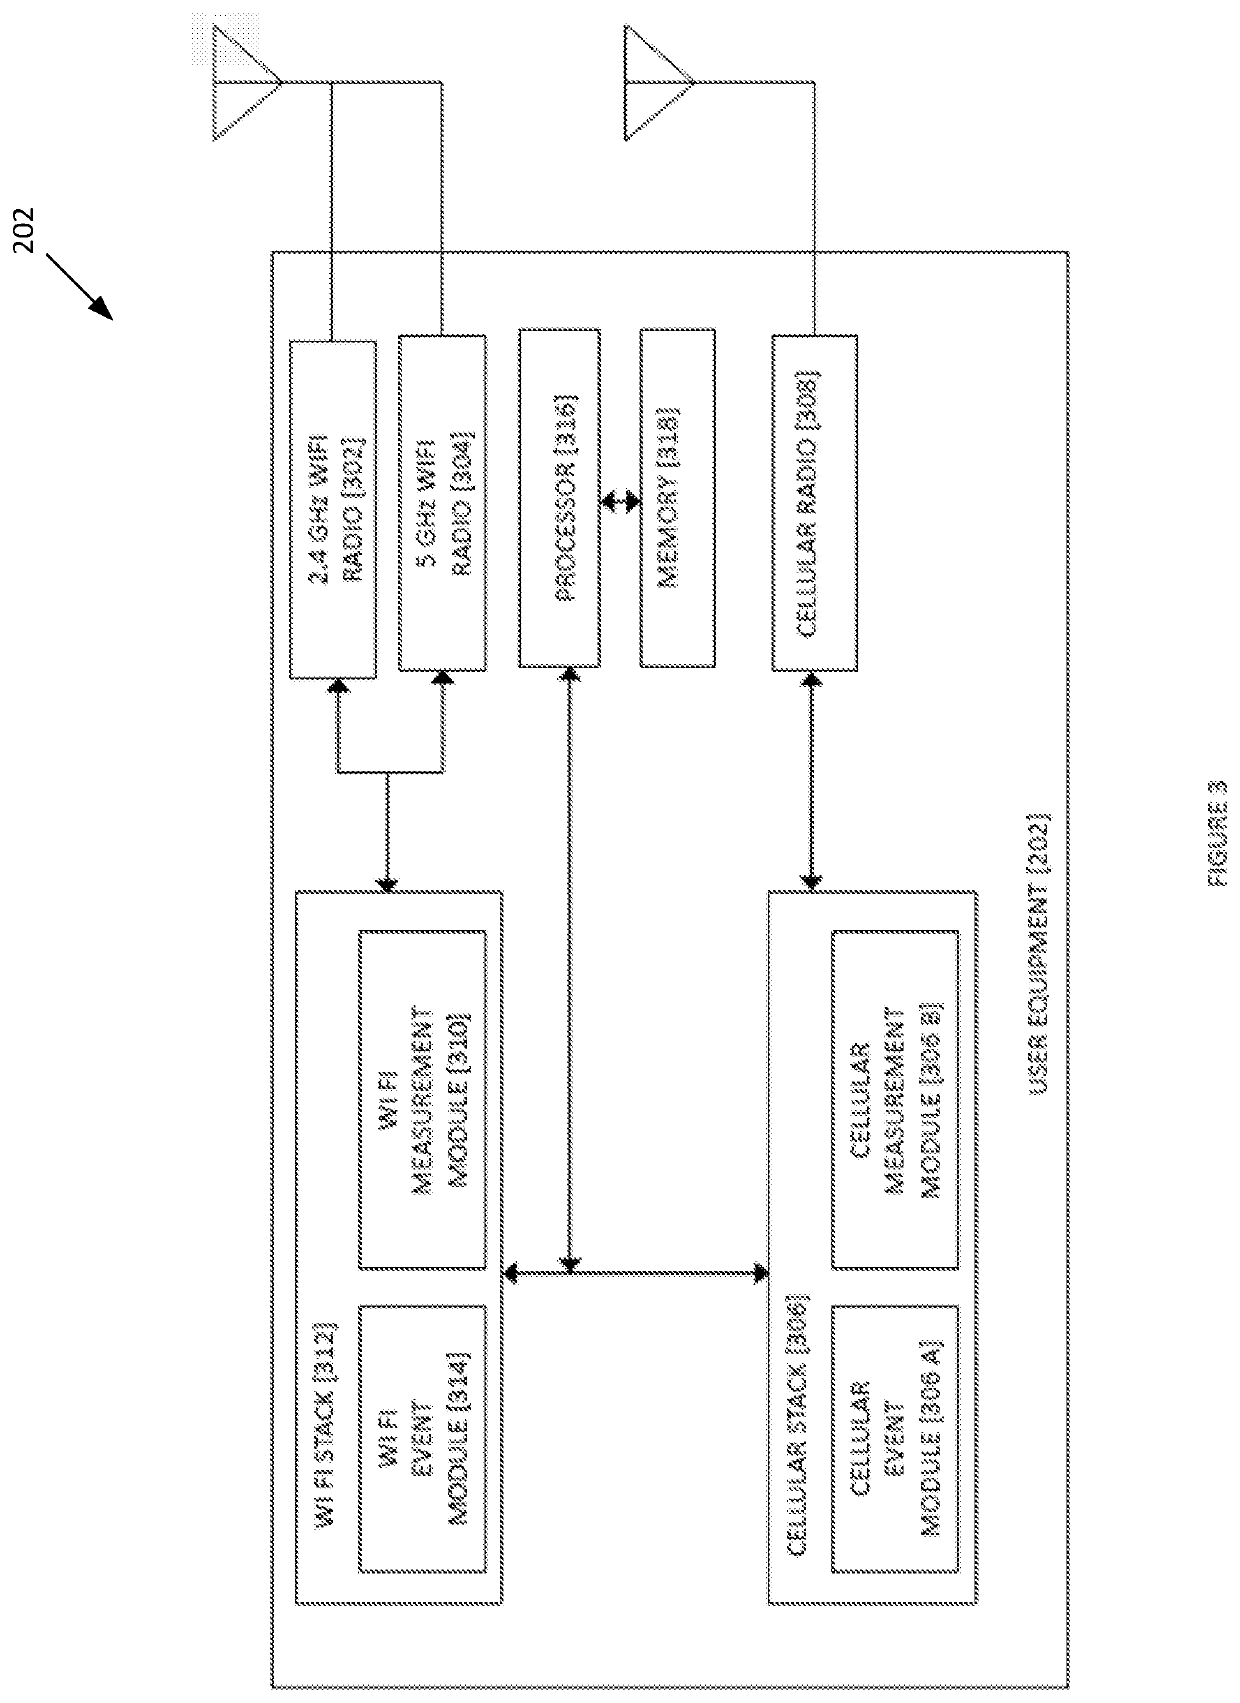 System and method for wi-fi offload